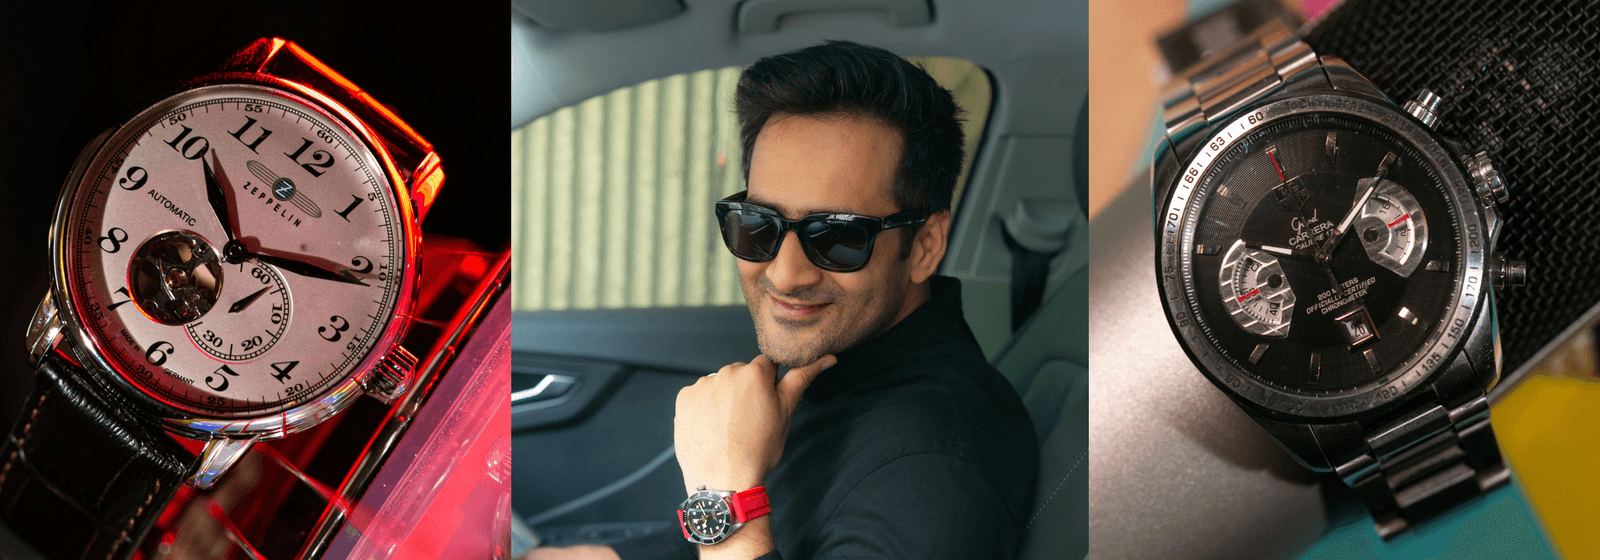 Watch Collector Aditya Jassi Strikes A Chord: Watches With A Story